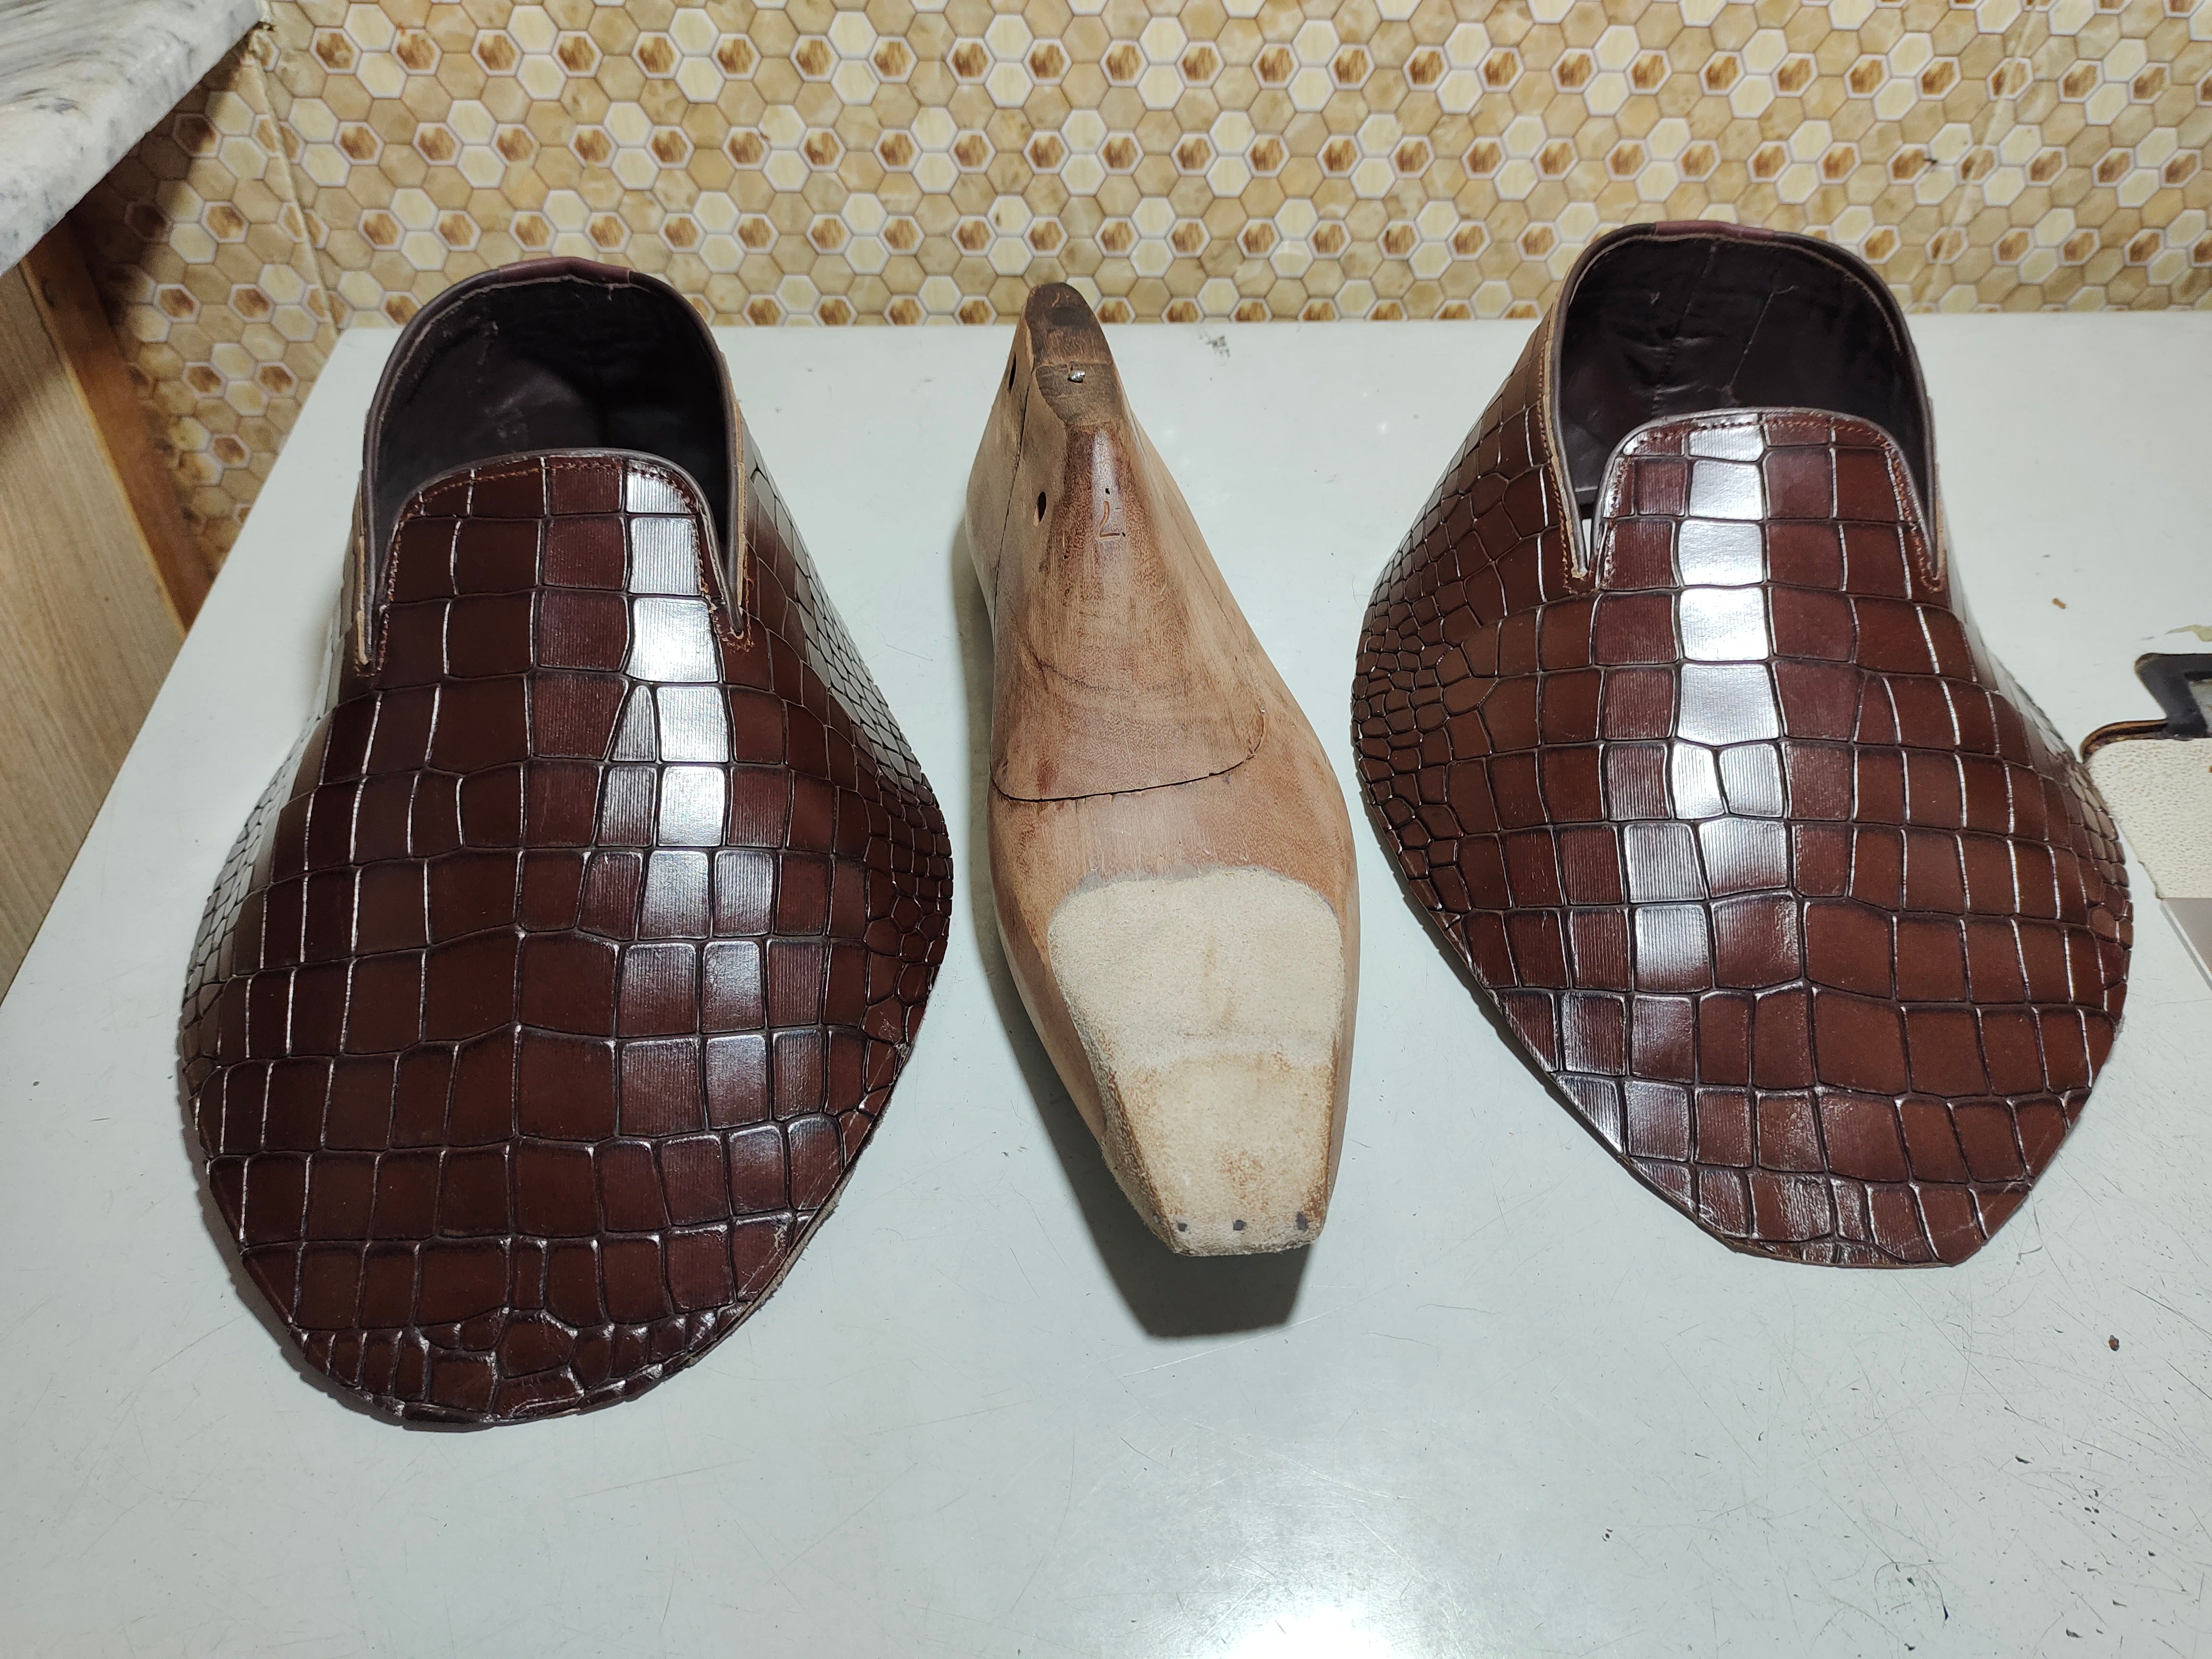 New Handmade Men’s Genuine Brown Crocodile Print Leather Loafer Moccasin Dress Shoes